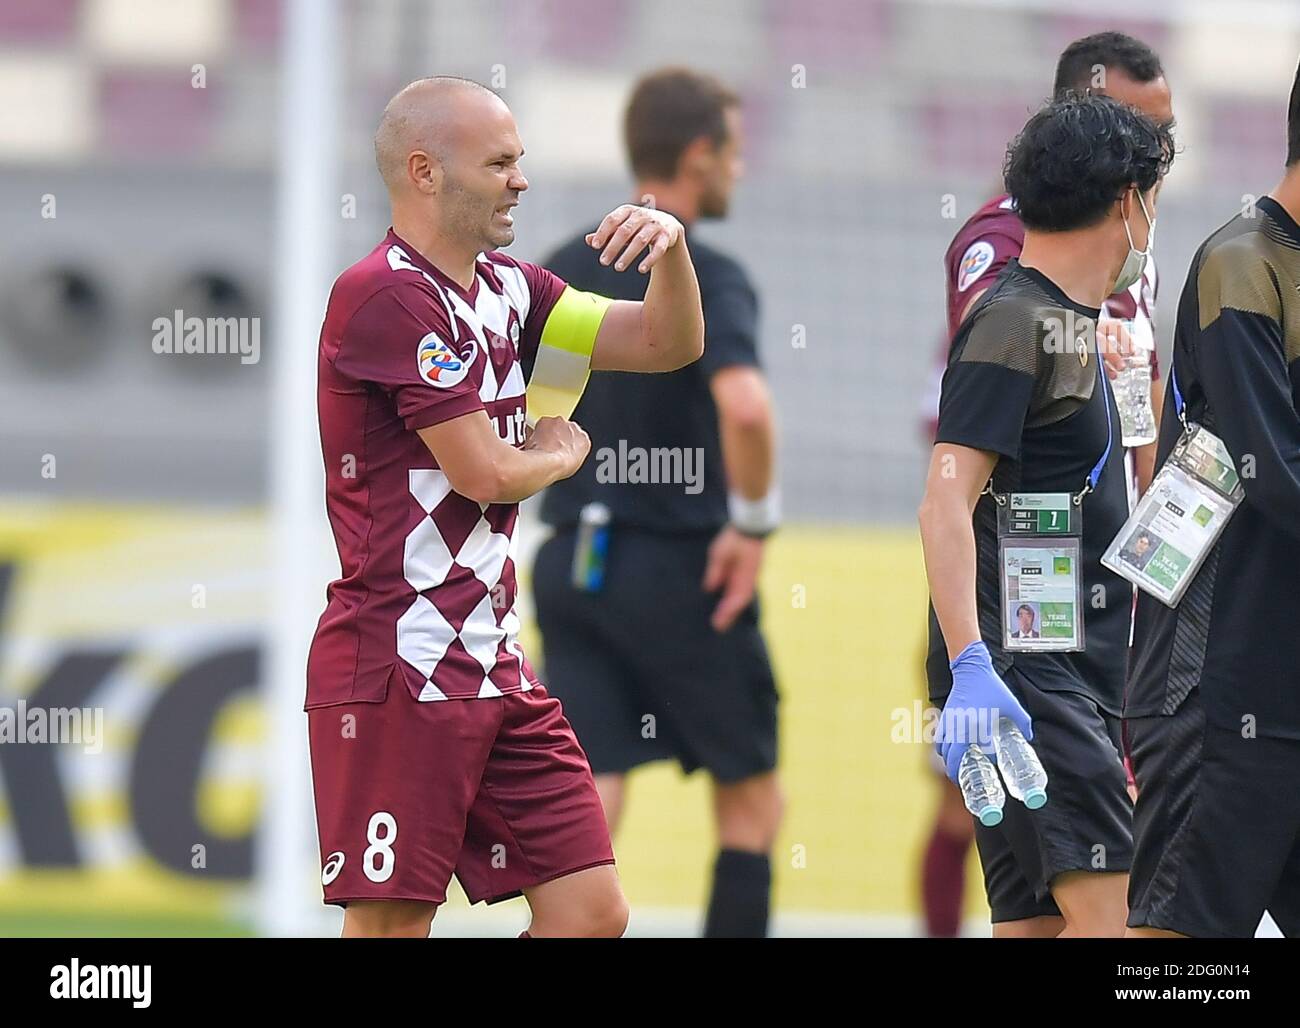 Doha, Qatar. 7th Dec, 2020. Andres Iniesta (L, front) of Vissel Kobe removes his armband during the round of 16 match of the AFC Champions League between Shanghai SIPG FC of China and Vissel Kobe of Japan in Doha, Qatar, Dec. 7, 2020. Credit: Nikku/Xinhua/Alamy Live News Stock Photo